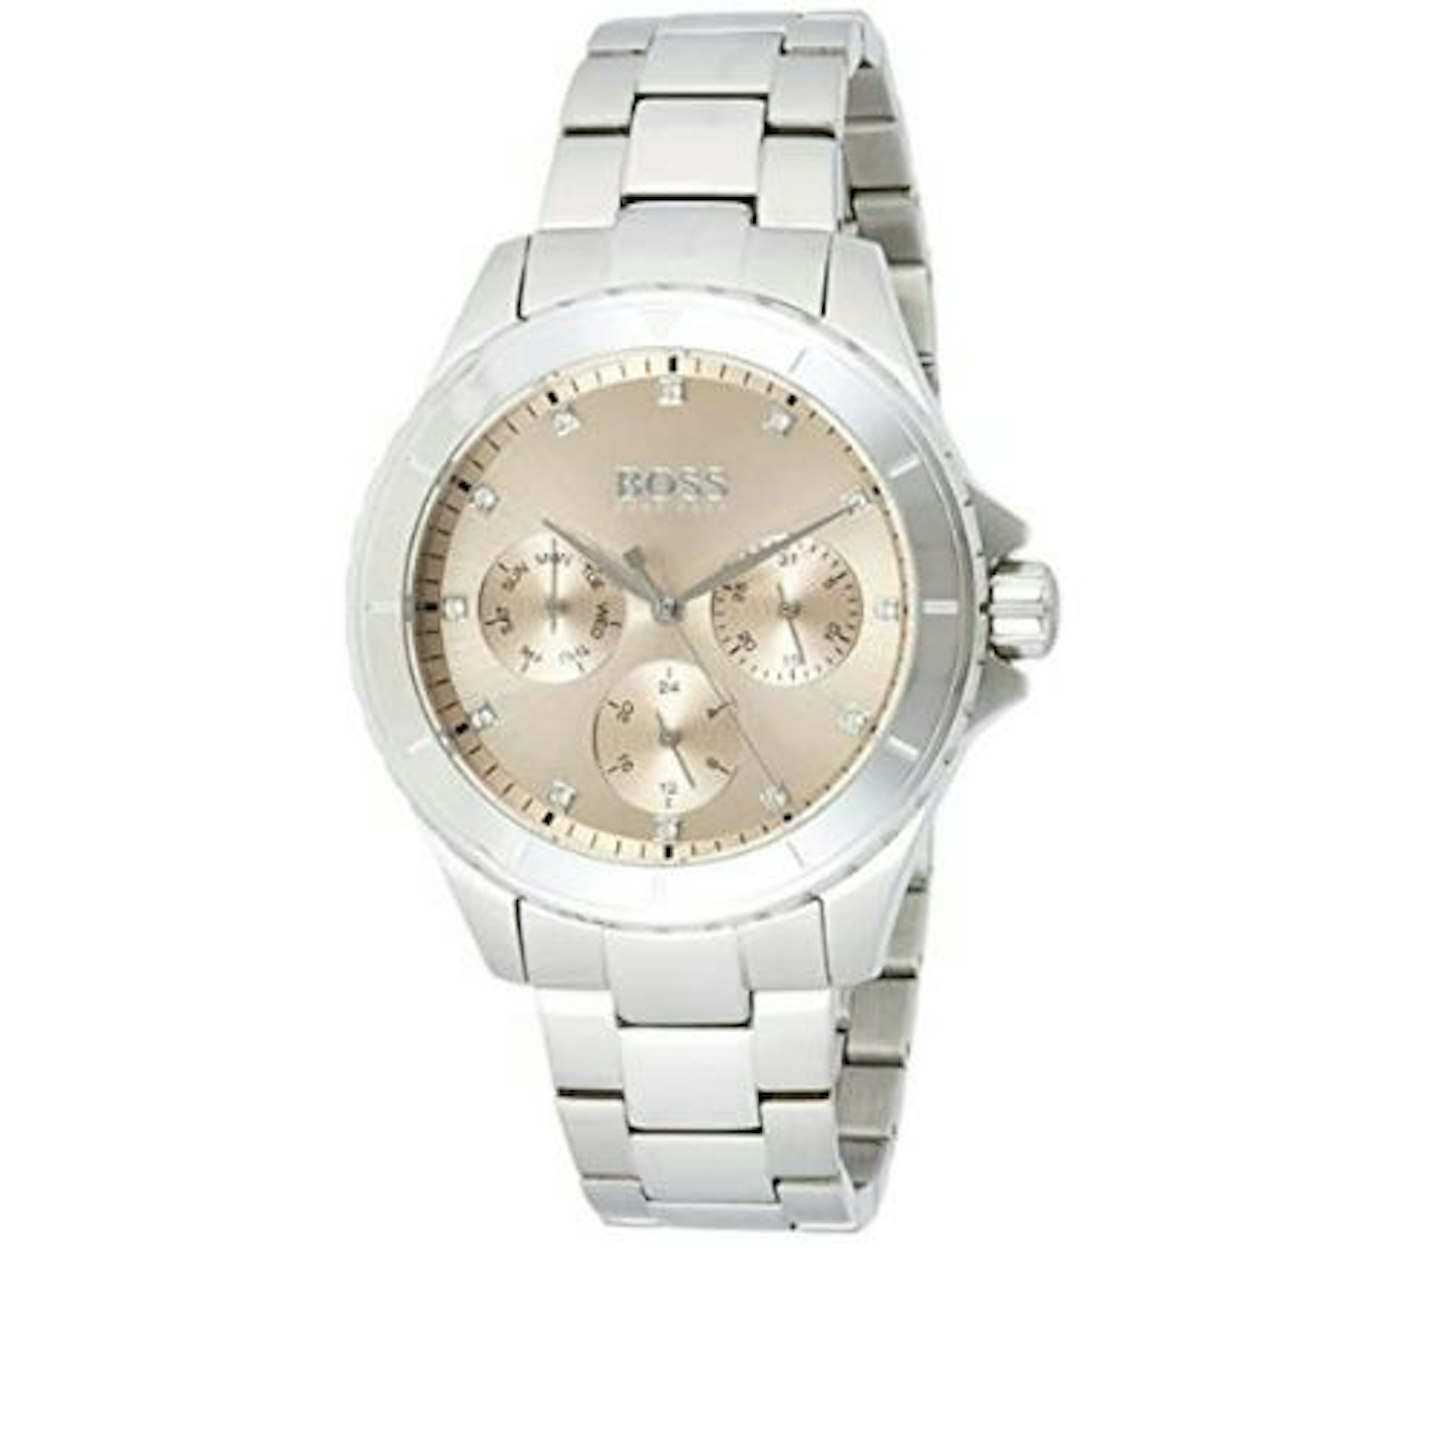 Hugo Boss Women's Multi dial Quartz Watch with Stainless Steel Strap